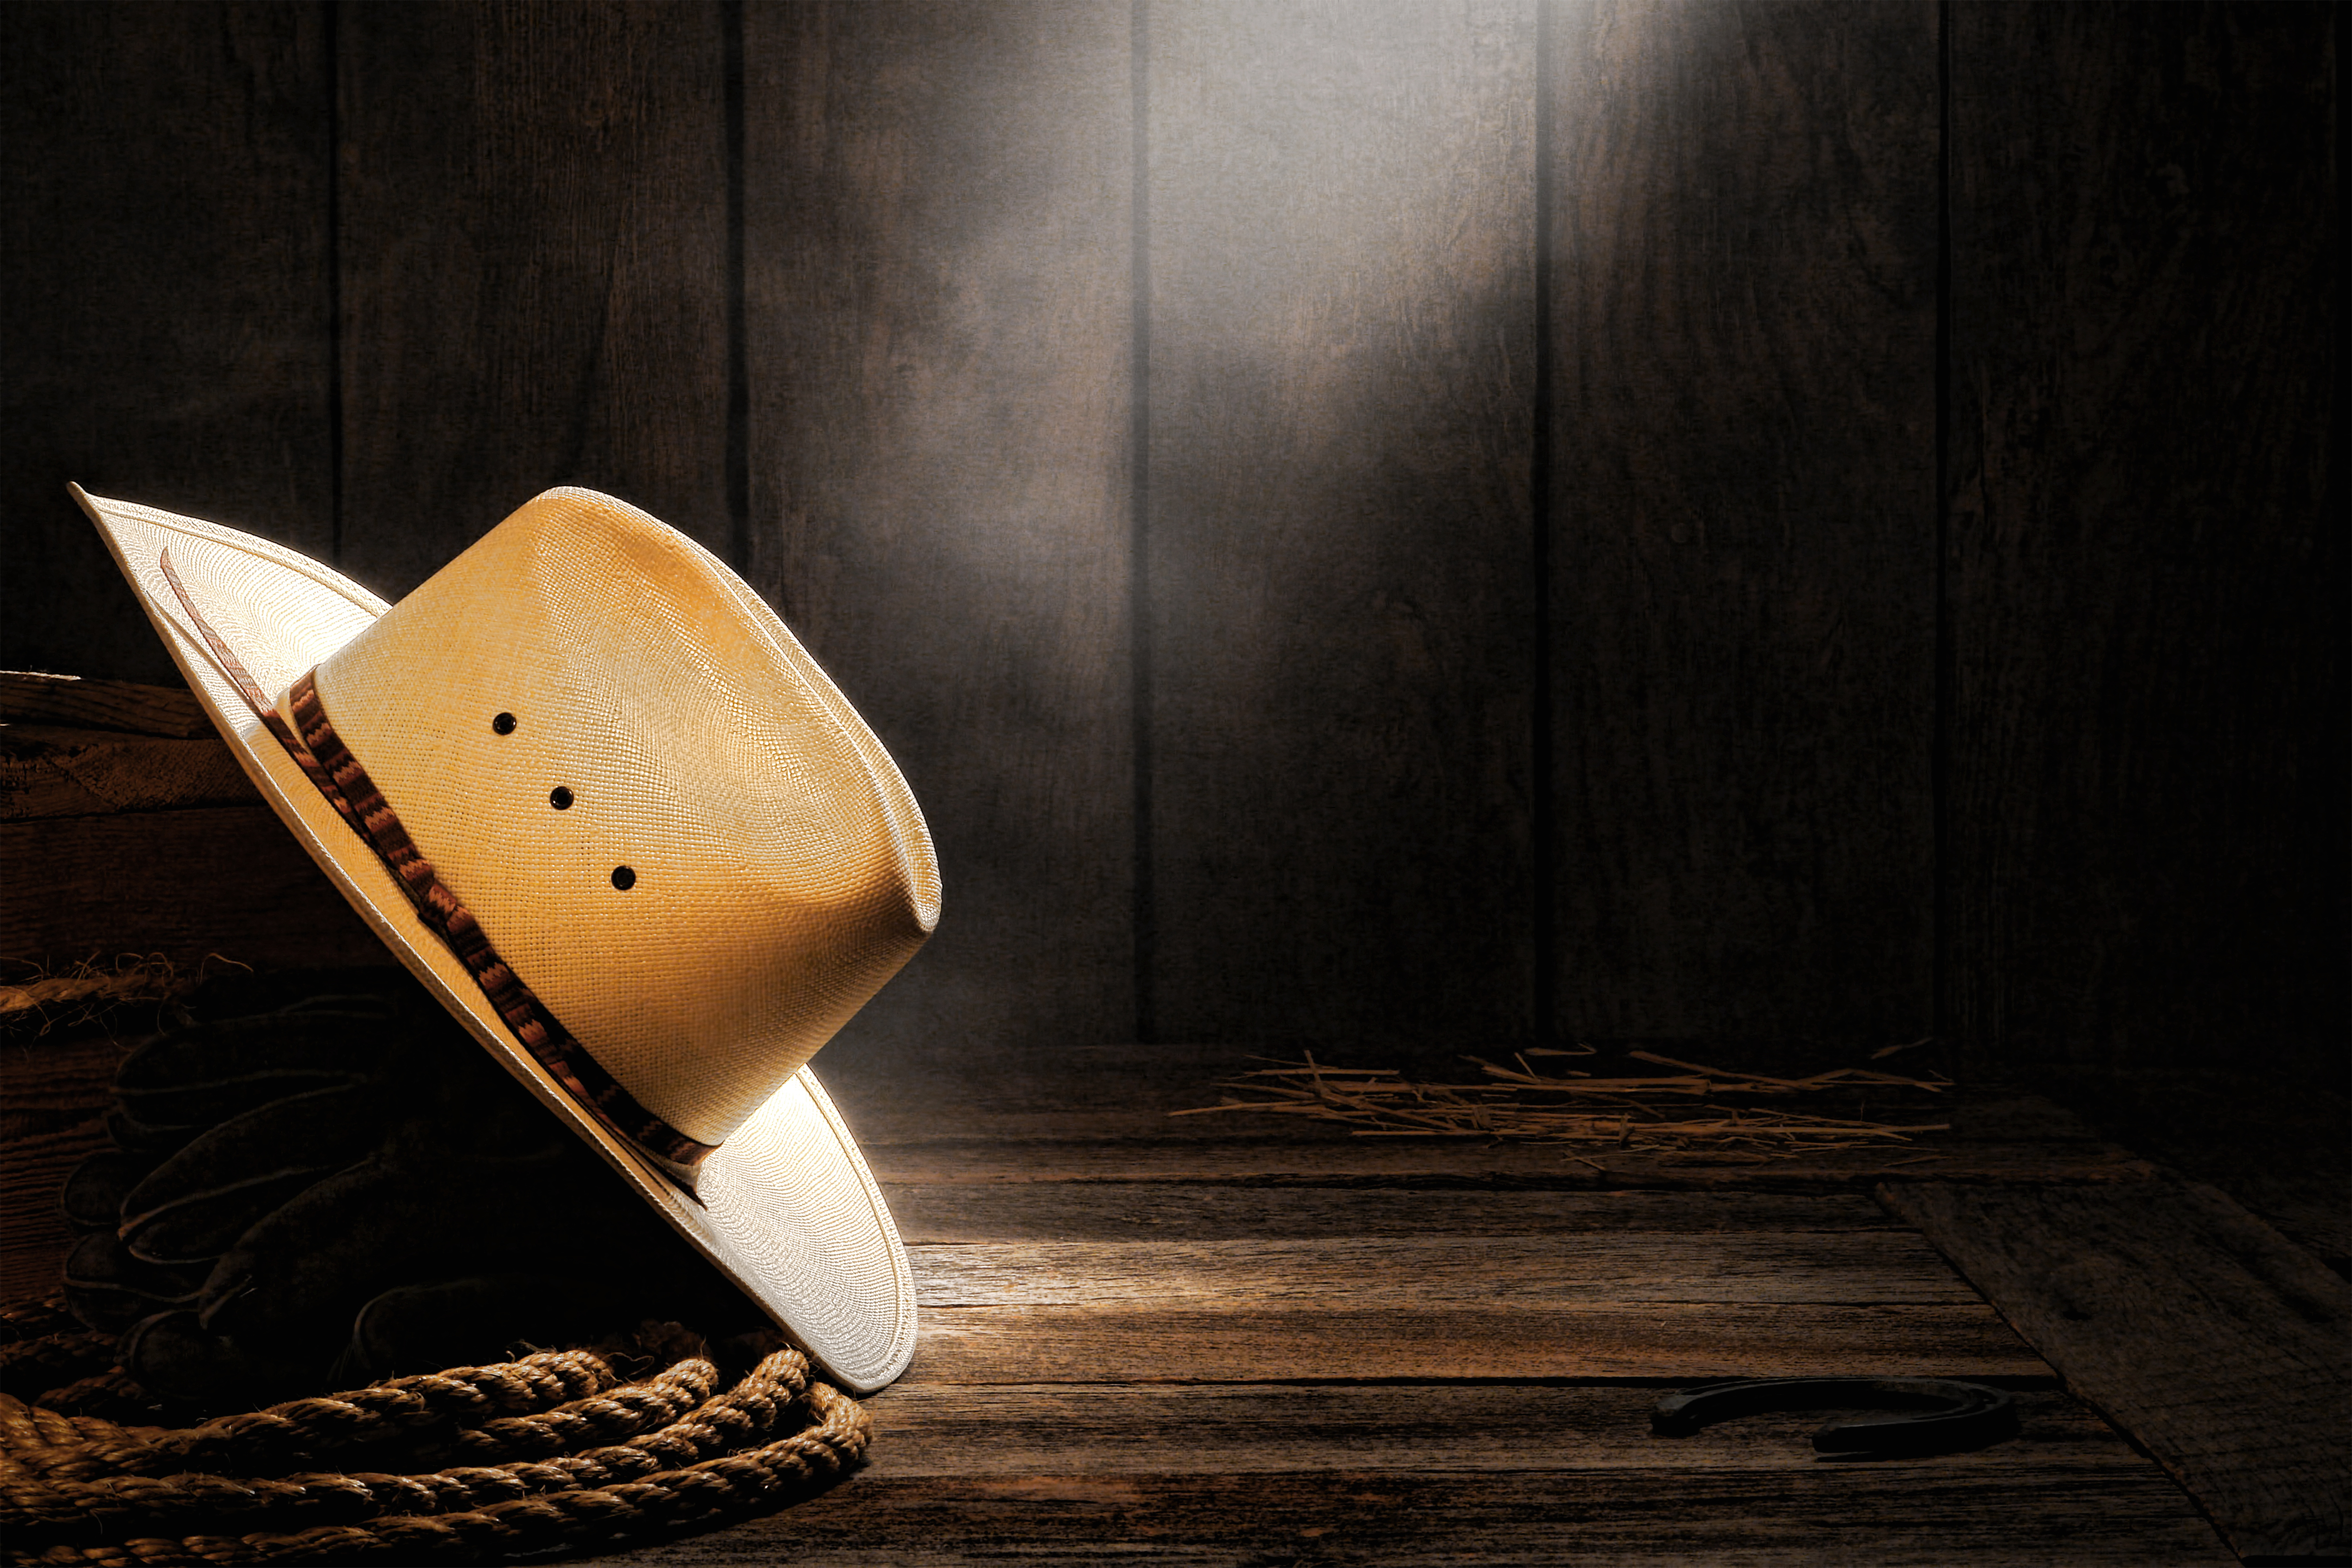 Rodeo Hat Background Gallery Yopriceville High Quality Image